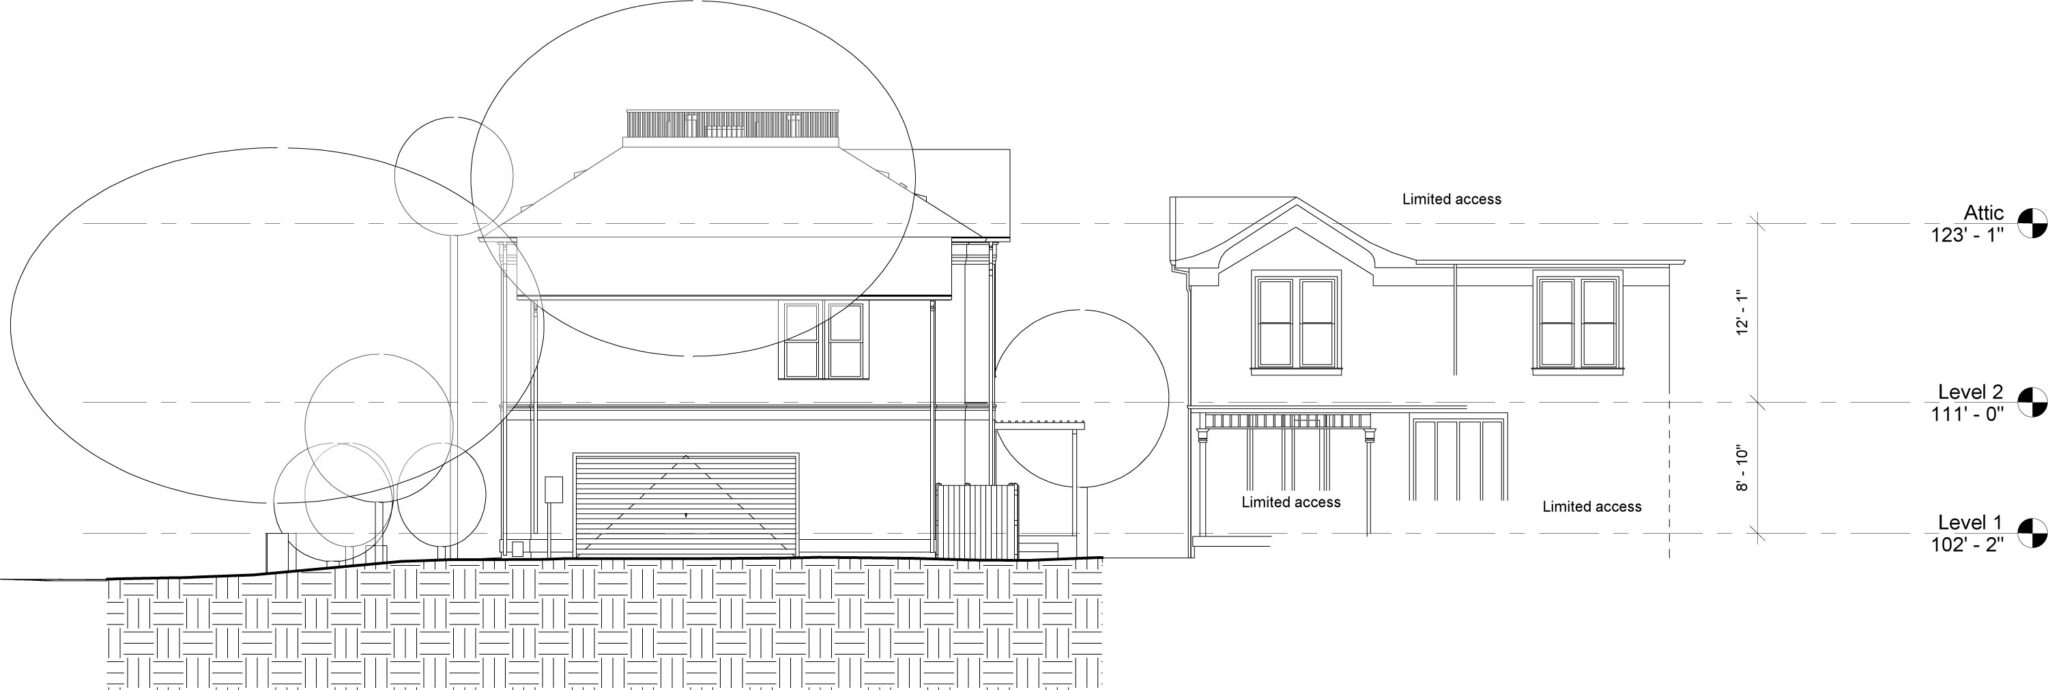 yountville residence elevation as built plans by 3dvdt